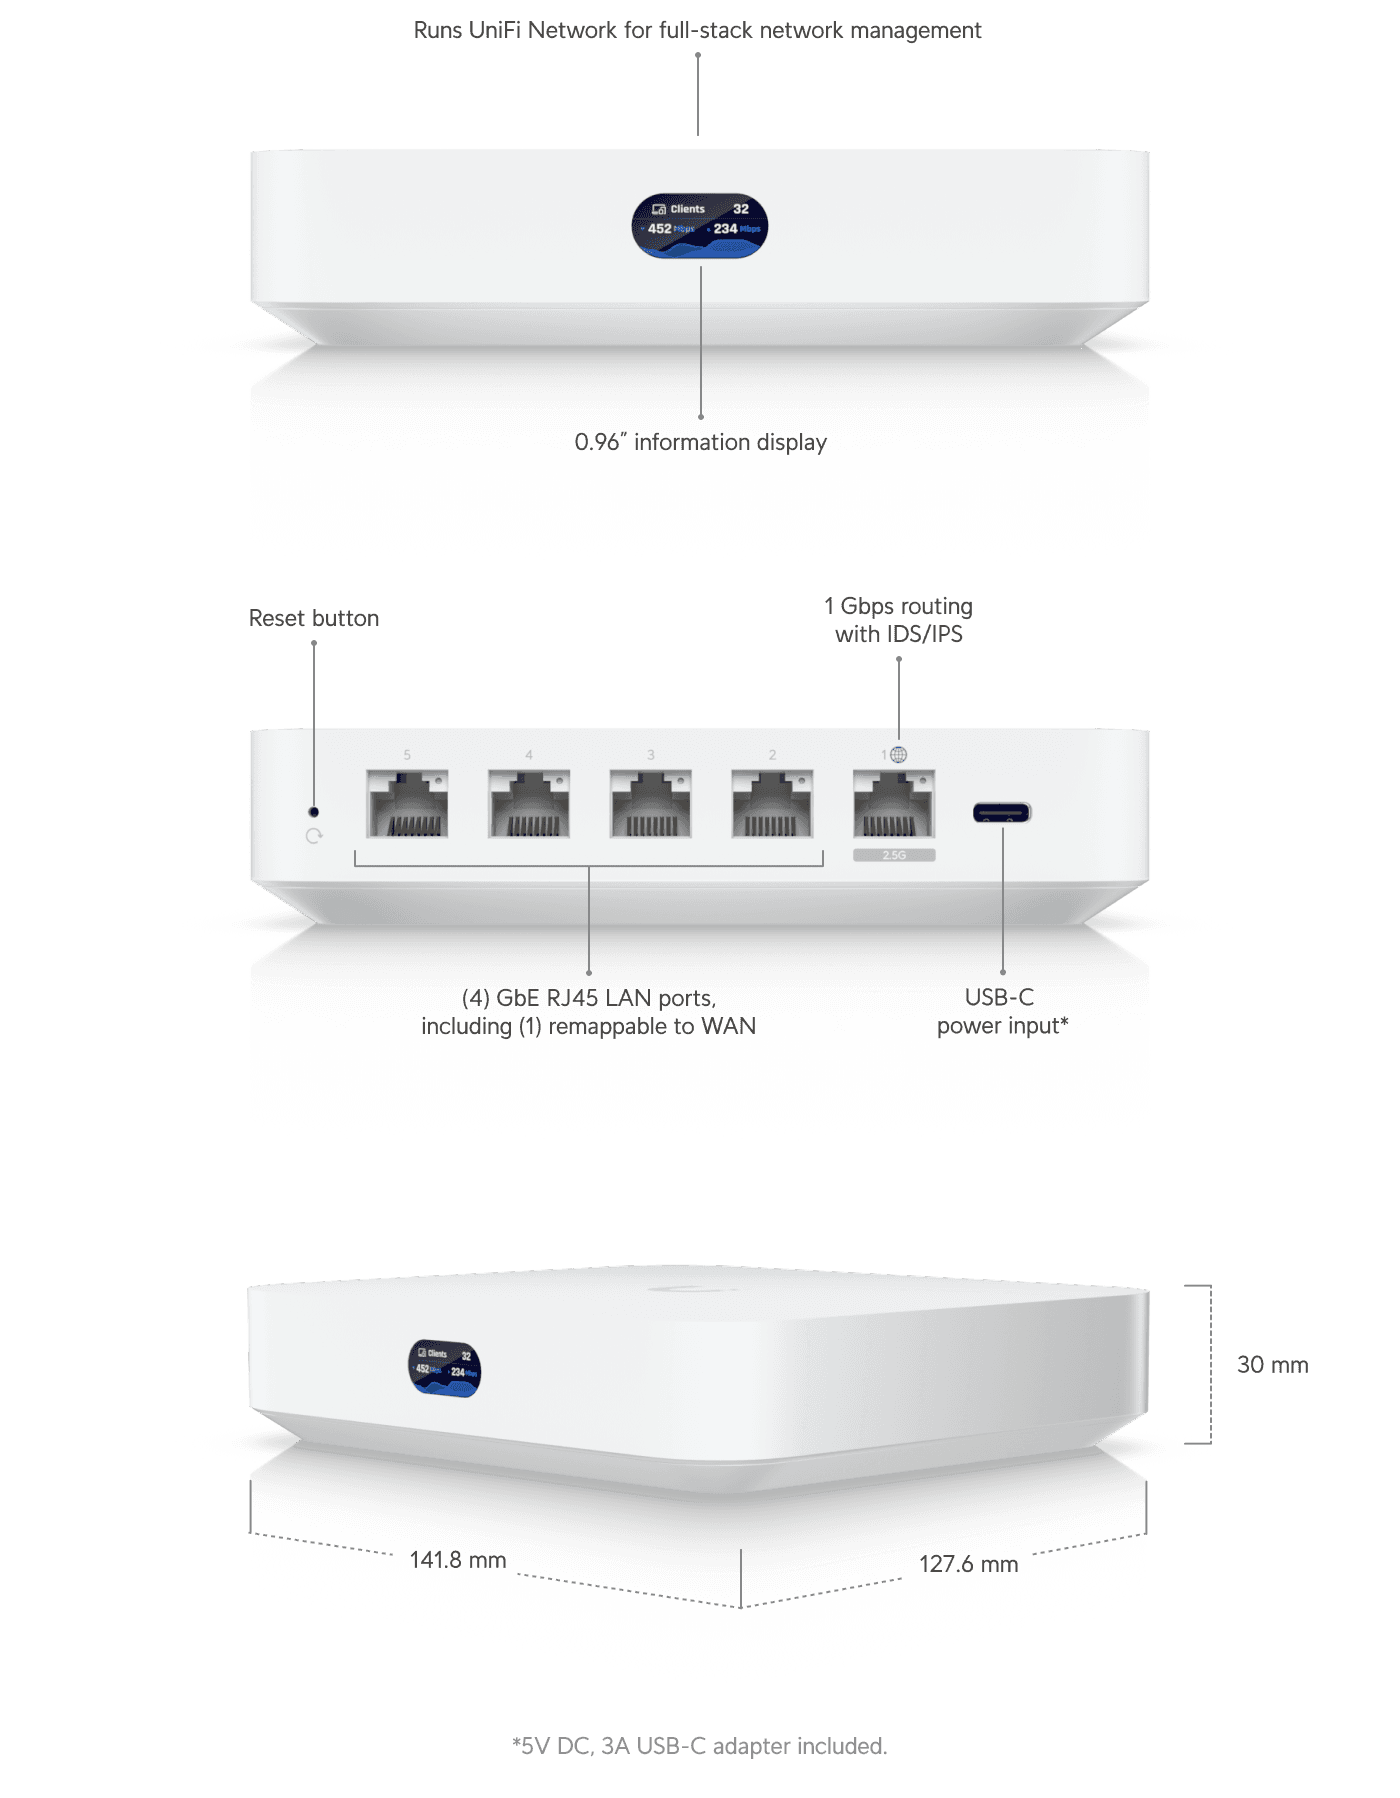 A large marketing image providing additional information about the product Ubiquiti UniFi Cloud Gateway Ultra Router - Additional alt info not provided